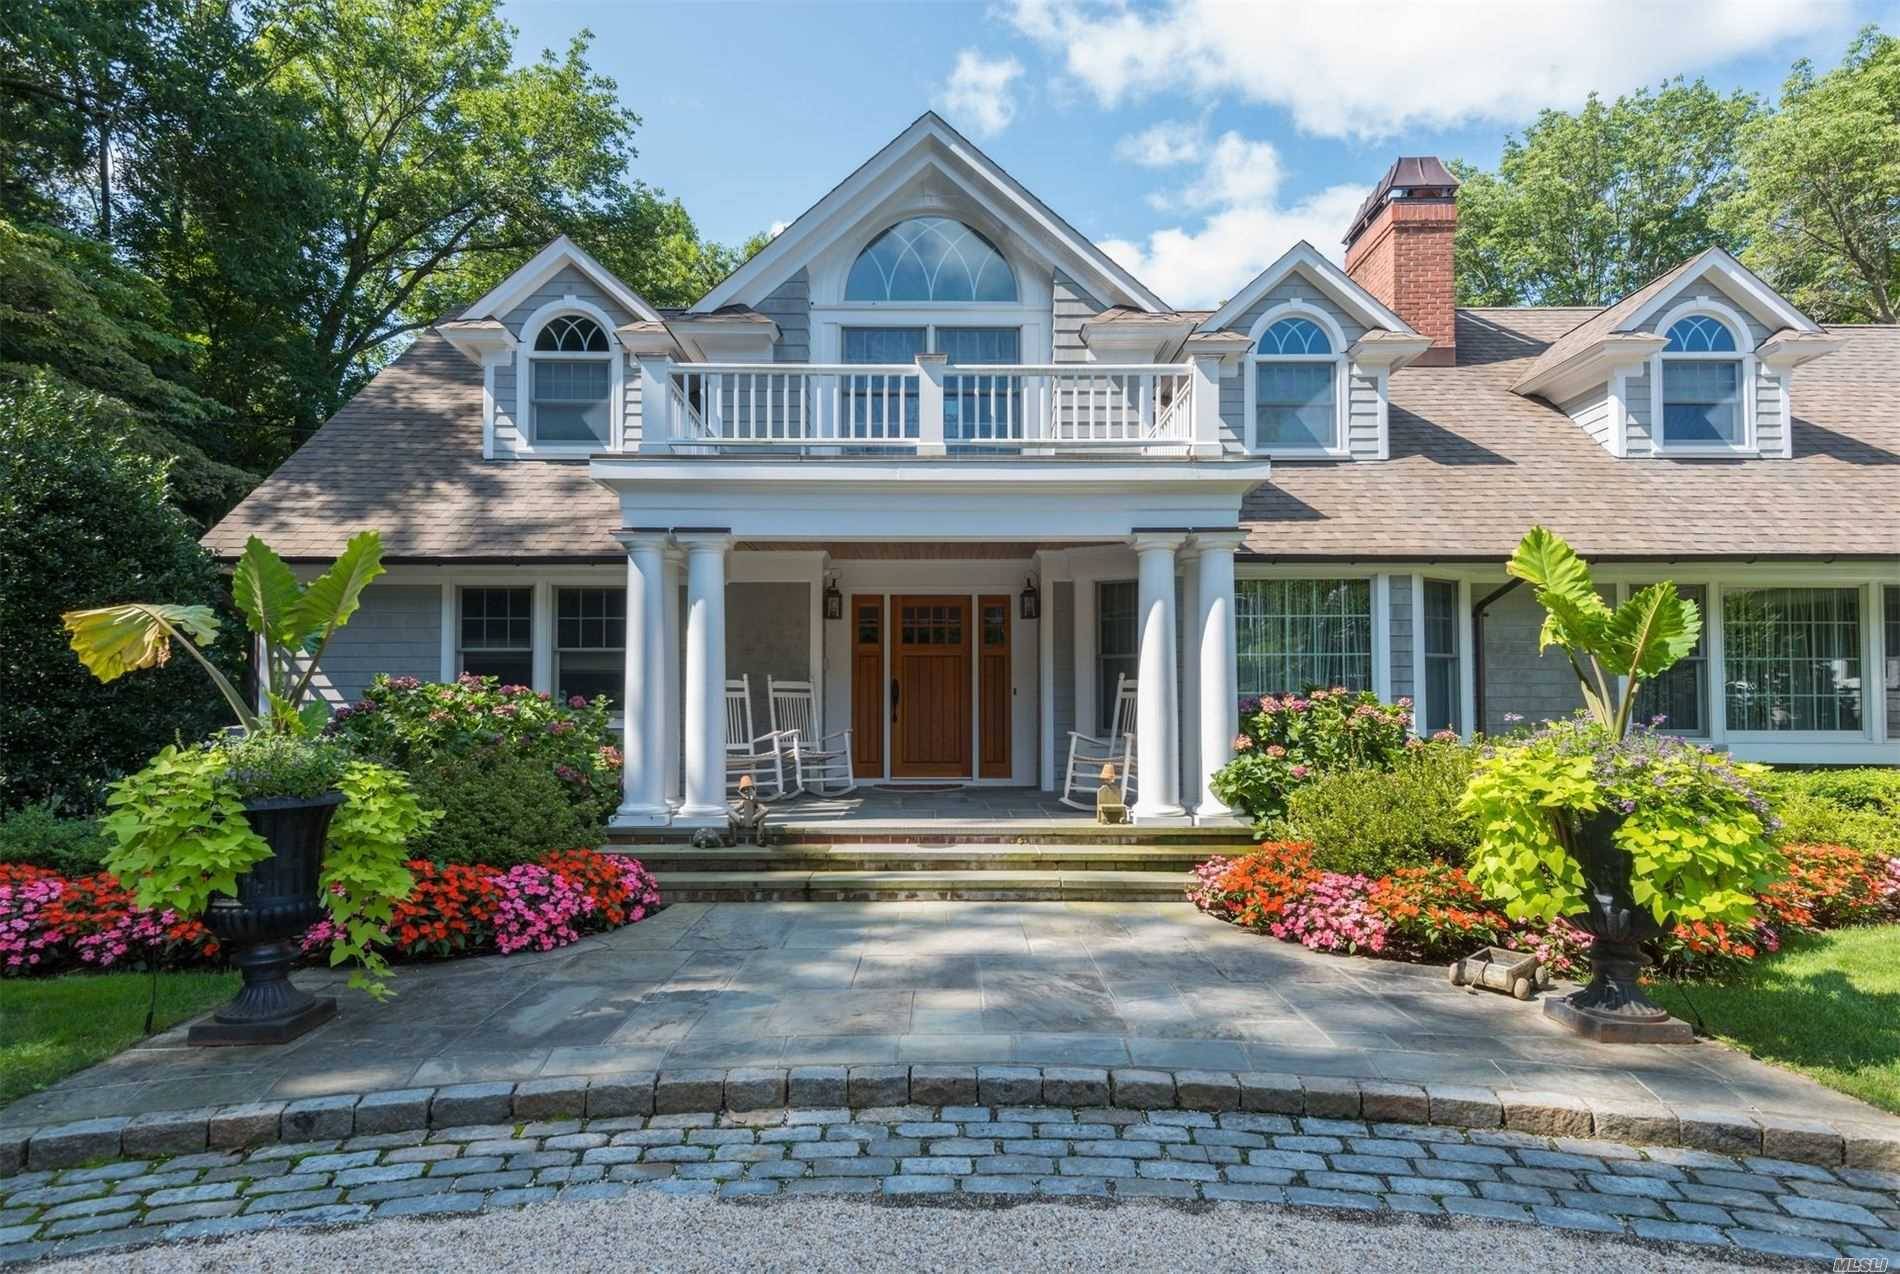 Picturesque Cedar Shingle Colonial in Cold Spring Harbor School District set back 200ft from road w well appointed mouldings amp ; copper gutters.